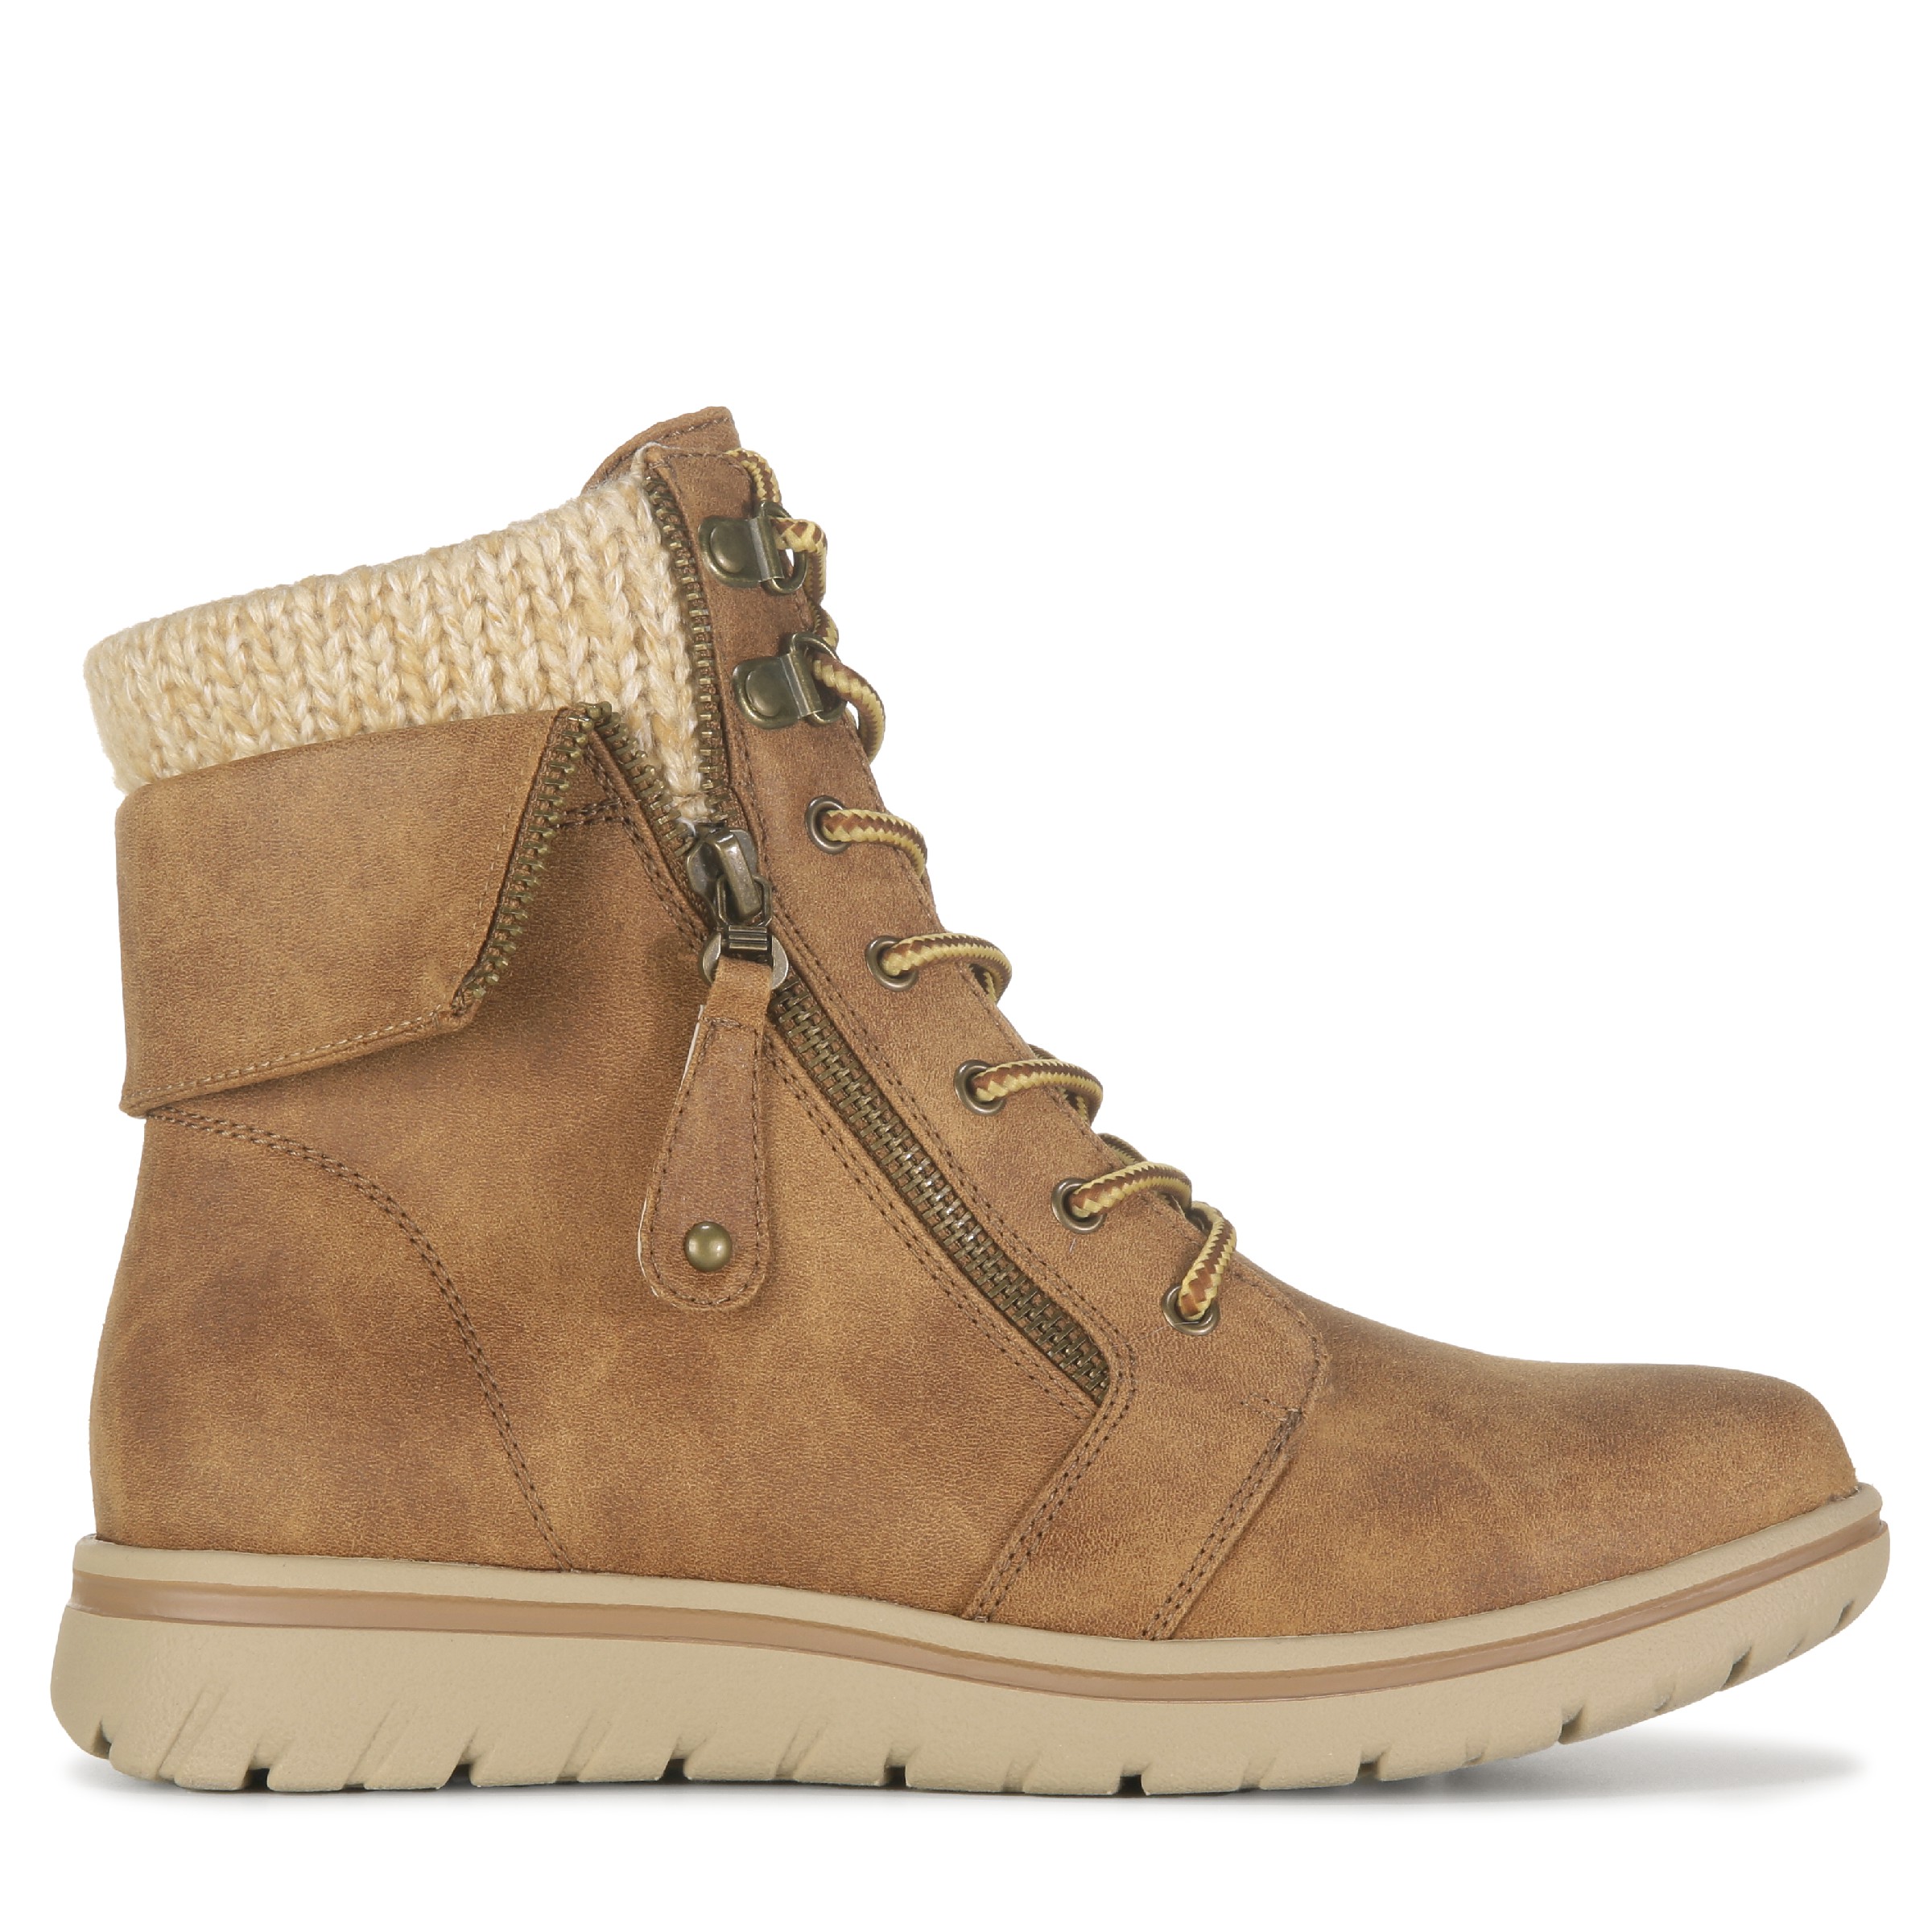 Women's Hope Lace Up Hiking Boot